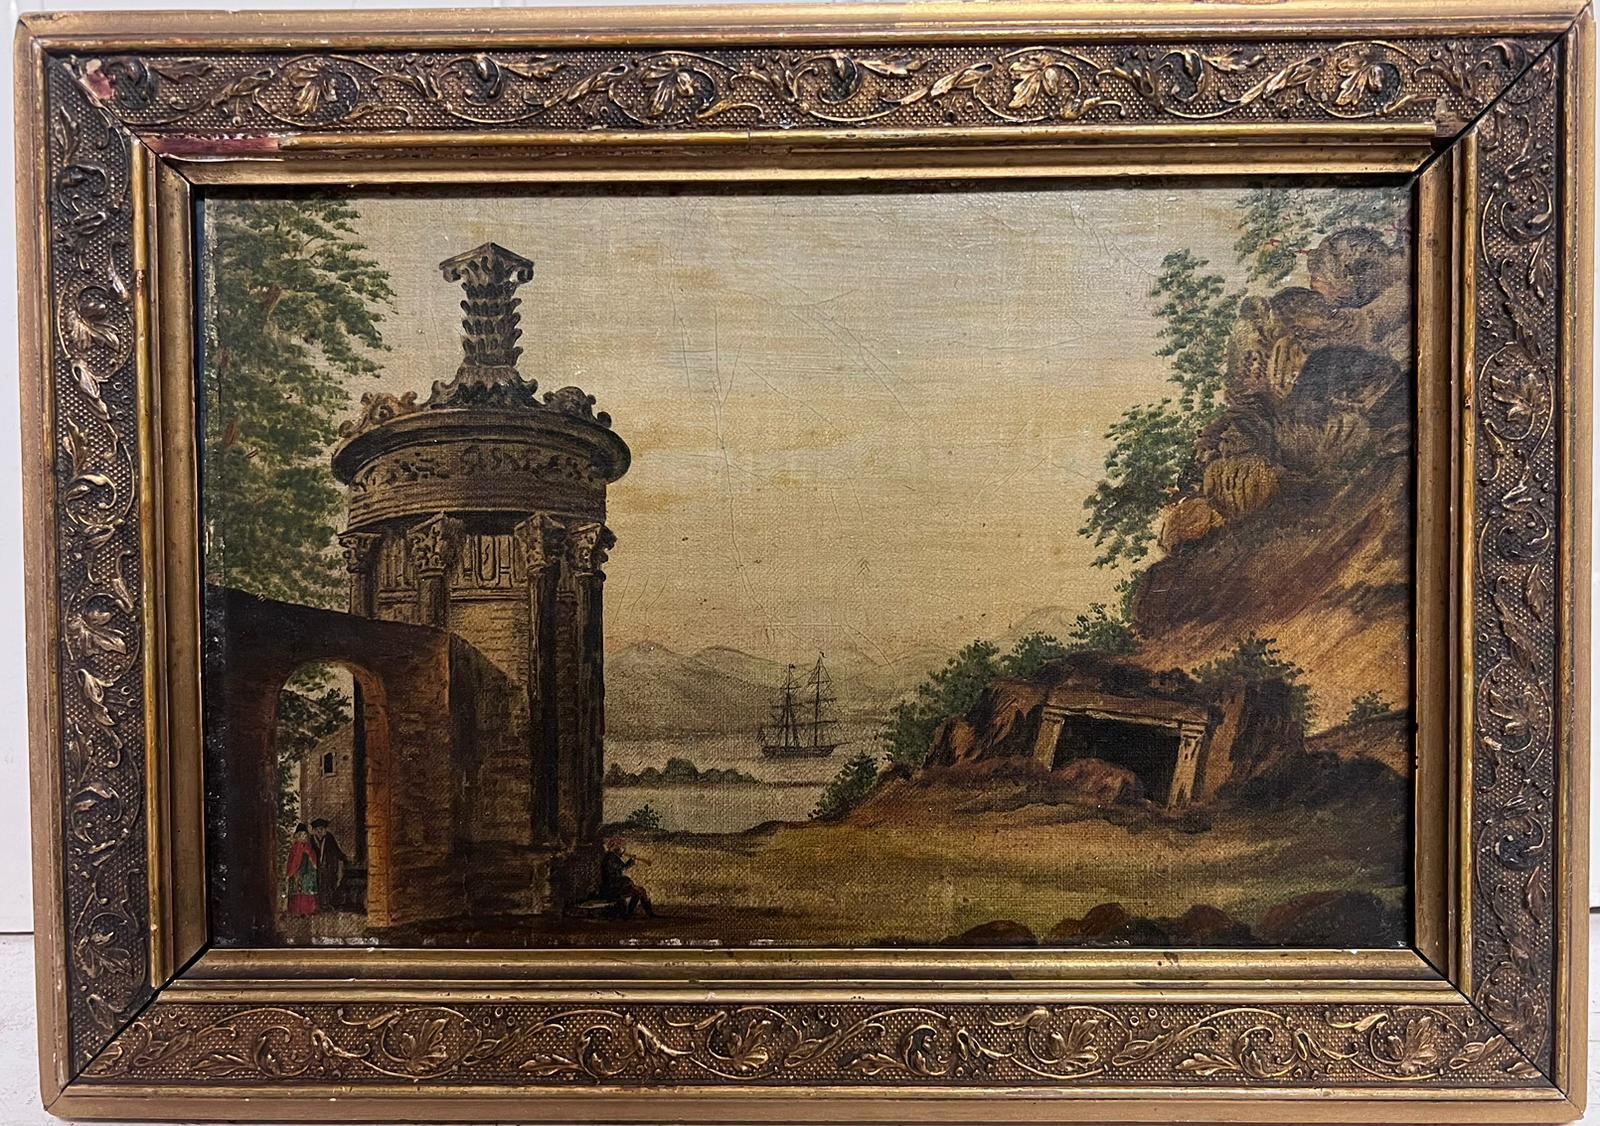 The Italian Classical Landscape
Italian artist, circa 1800's
oil on canvas laid on board, framed
framed: 9.5 x 13 inches
board: 7 x 11 inches
provenance: private collection
condition: a few scuffs and marks to the surface but overall good and sound